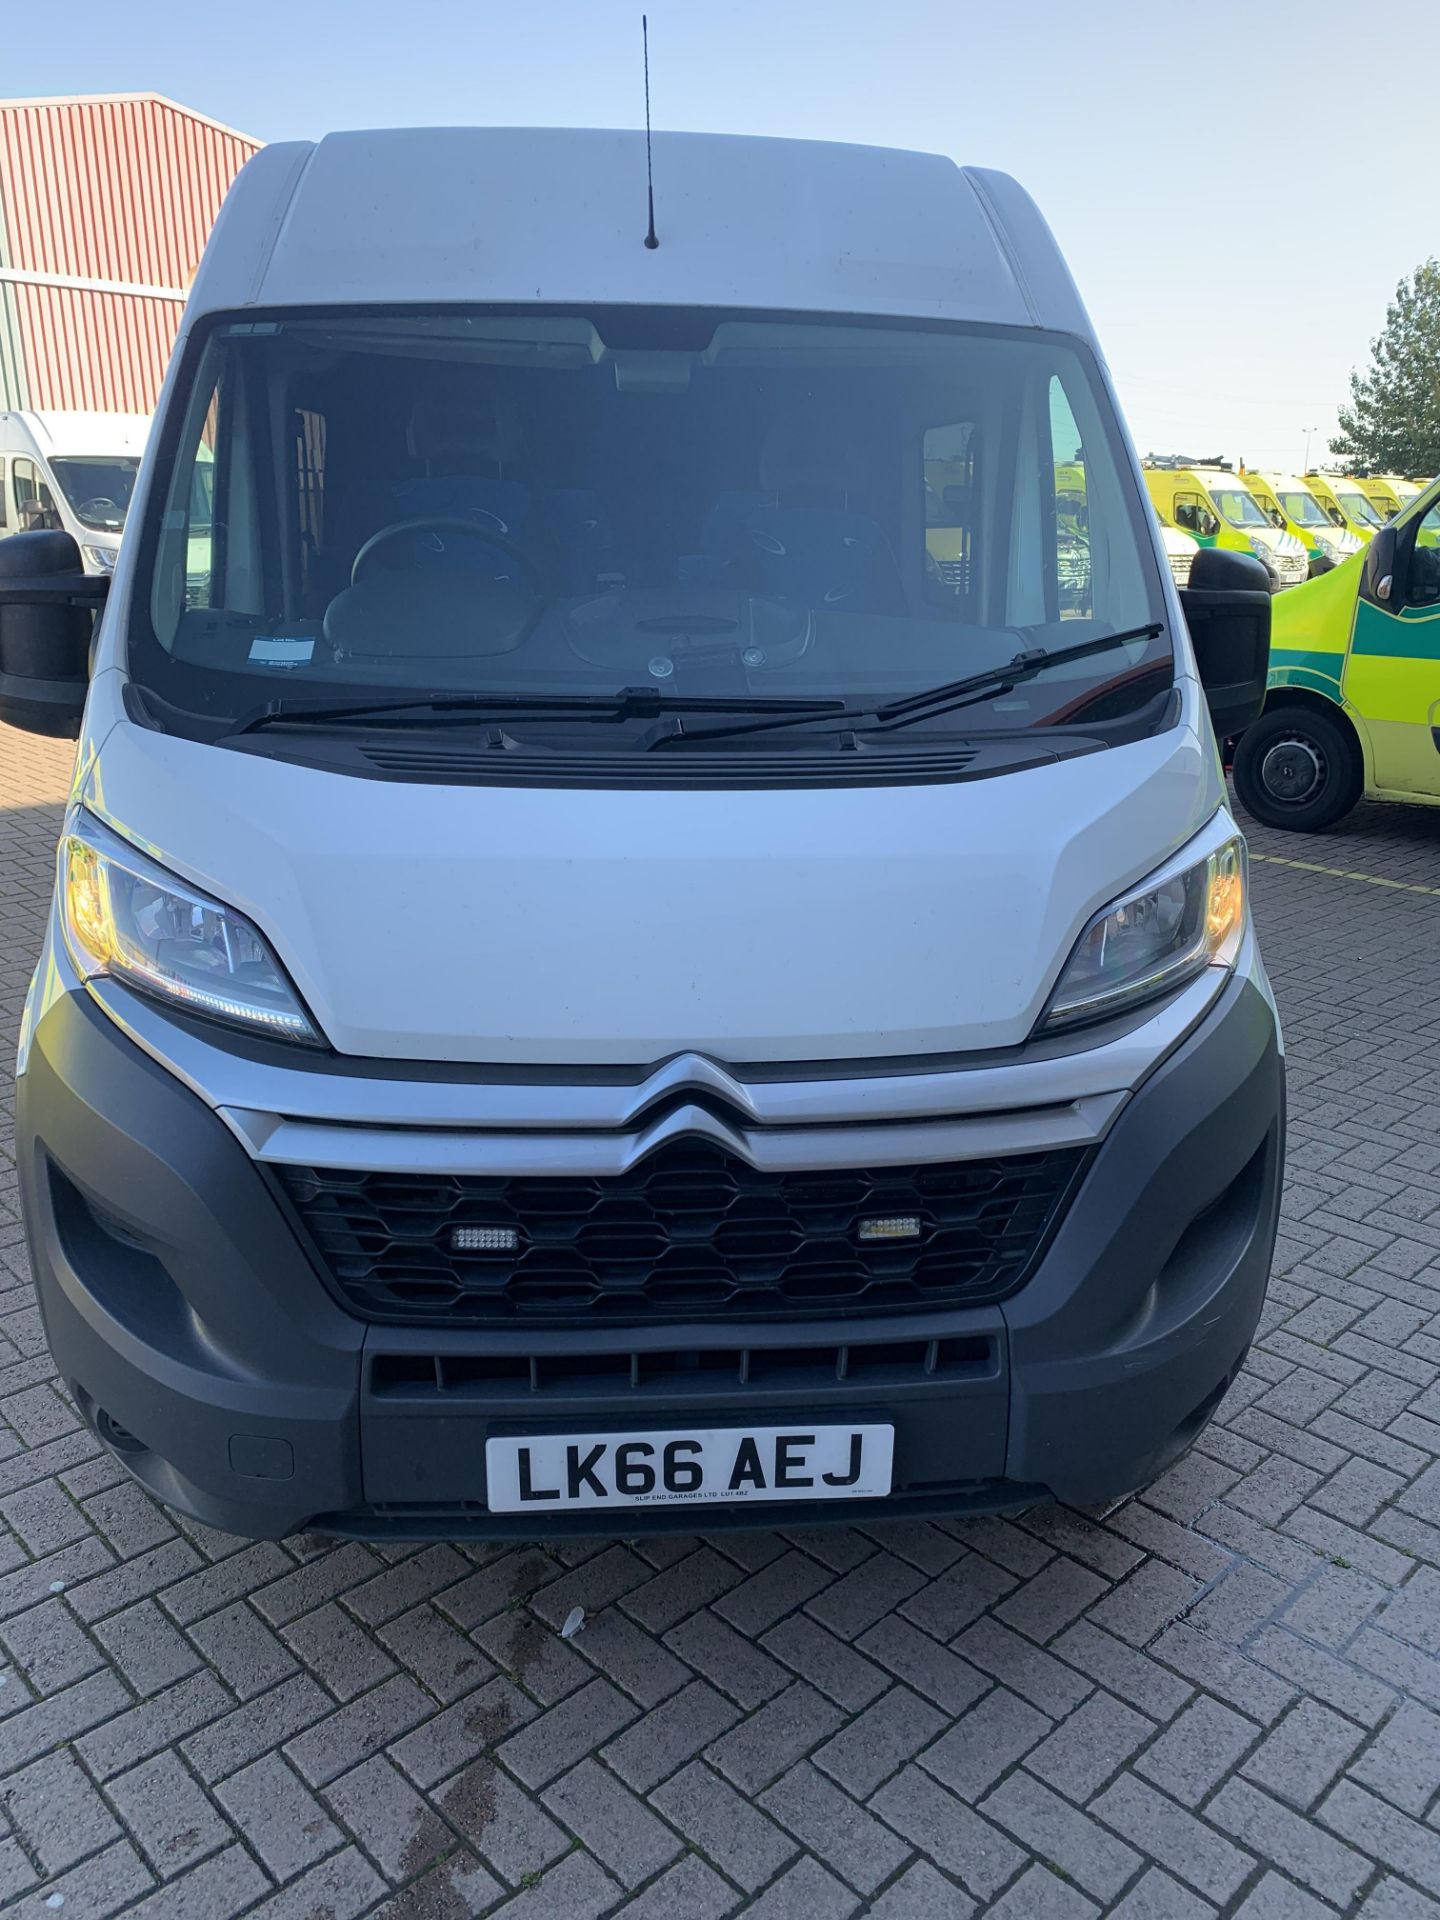 Citroen Relay 35 L3H2 Eprise Blue HDI secure cell covert ambulance, with rear steel prison transport